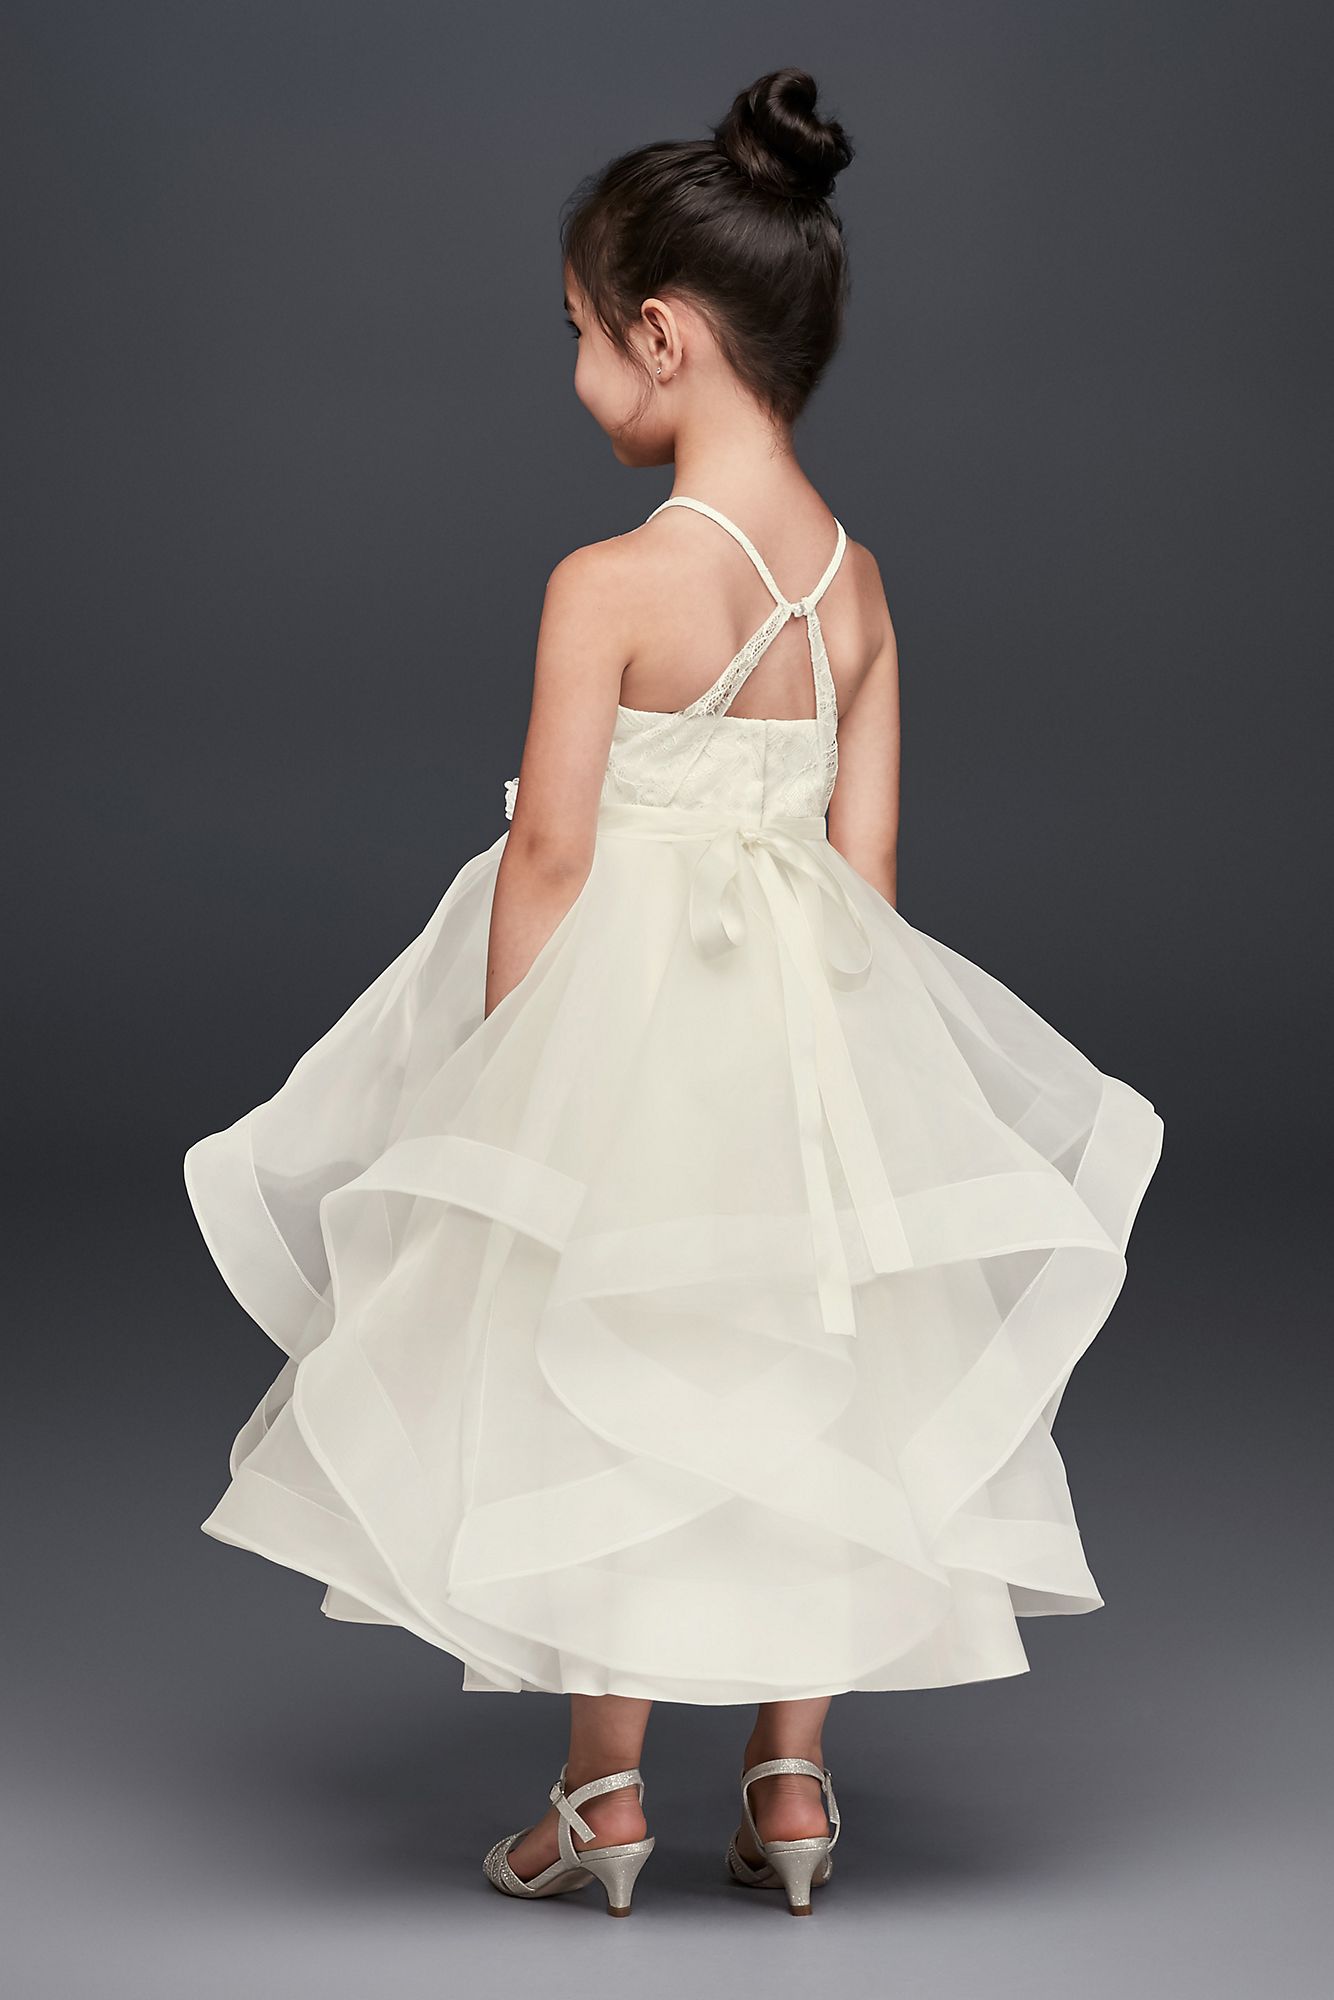 Lace and Tulle Flower Girl Dress with Full Skirt   WG1371